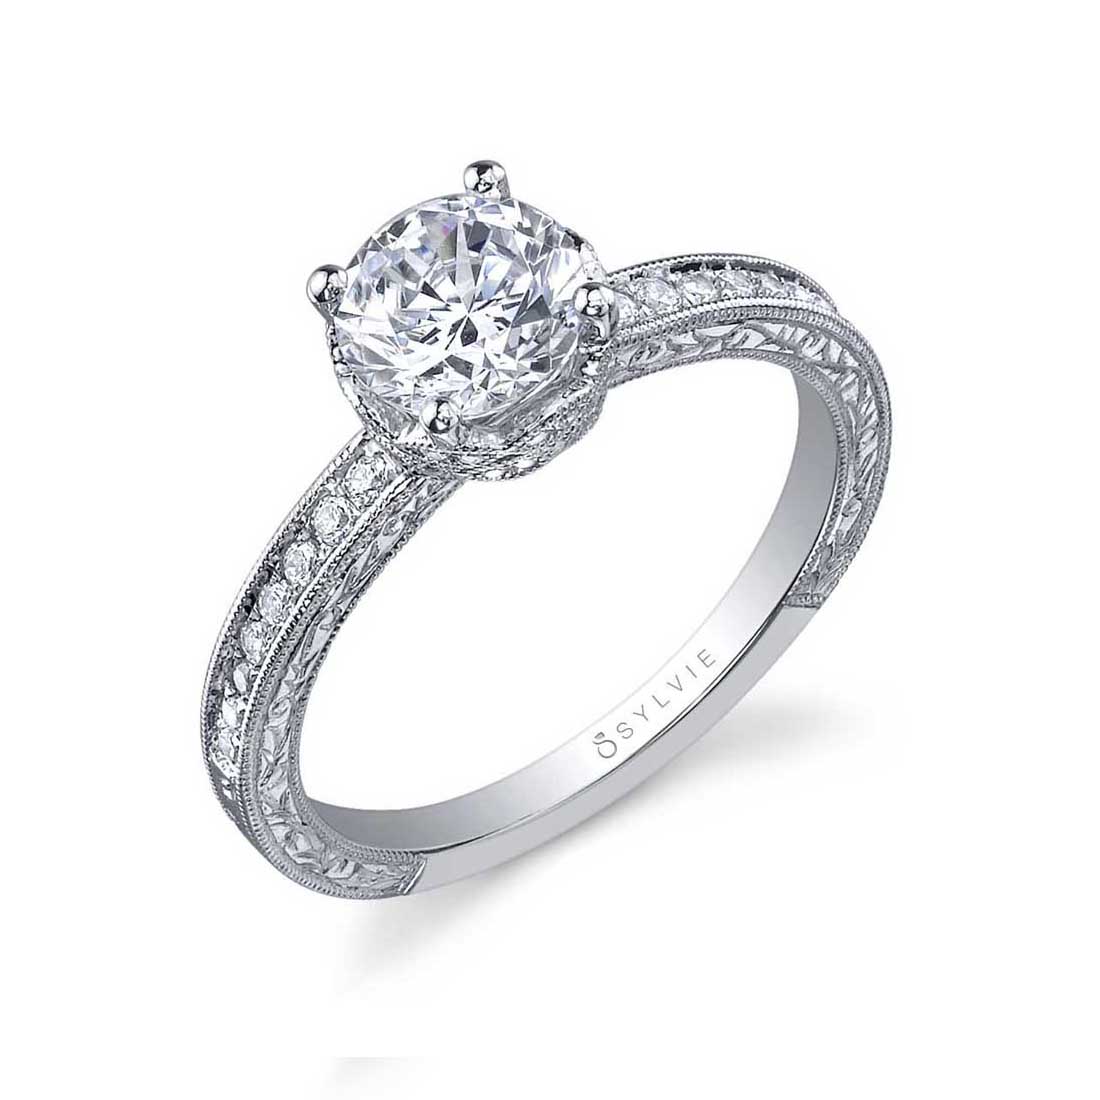 Profile Image of a Vintage Inspired Classic Engagement Ring